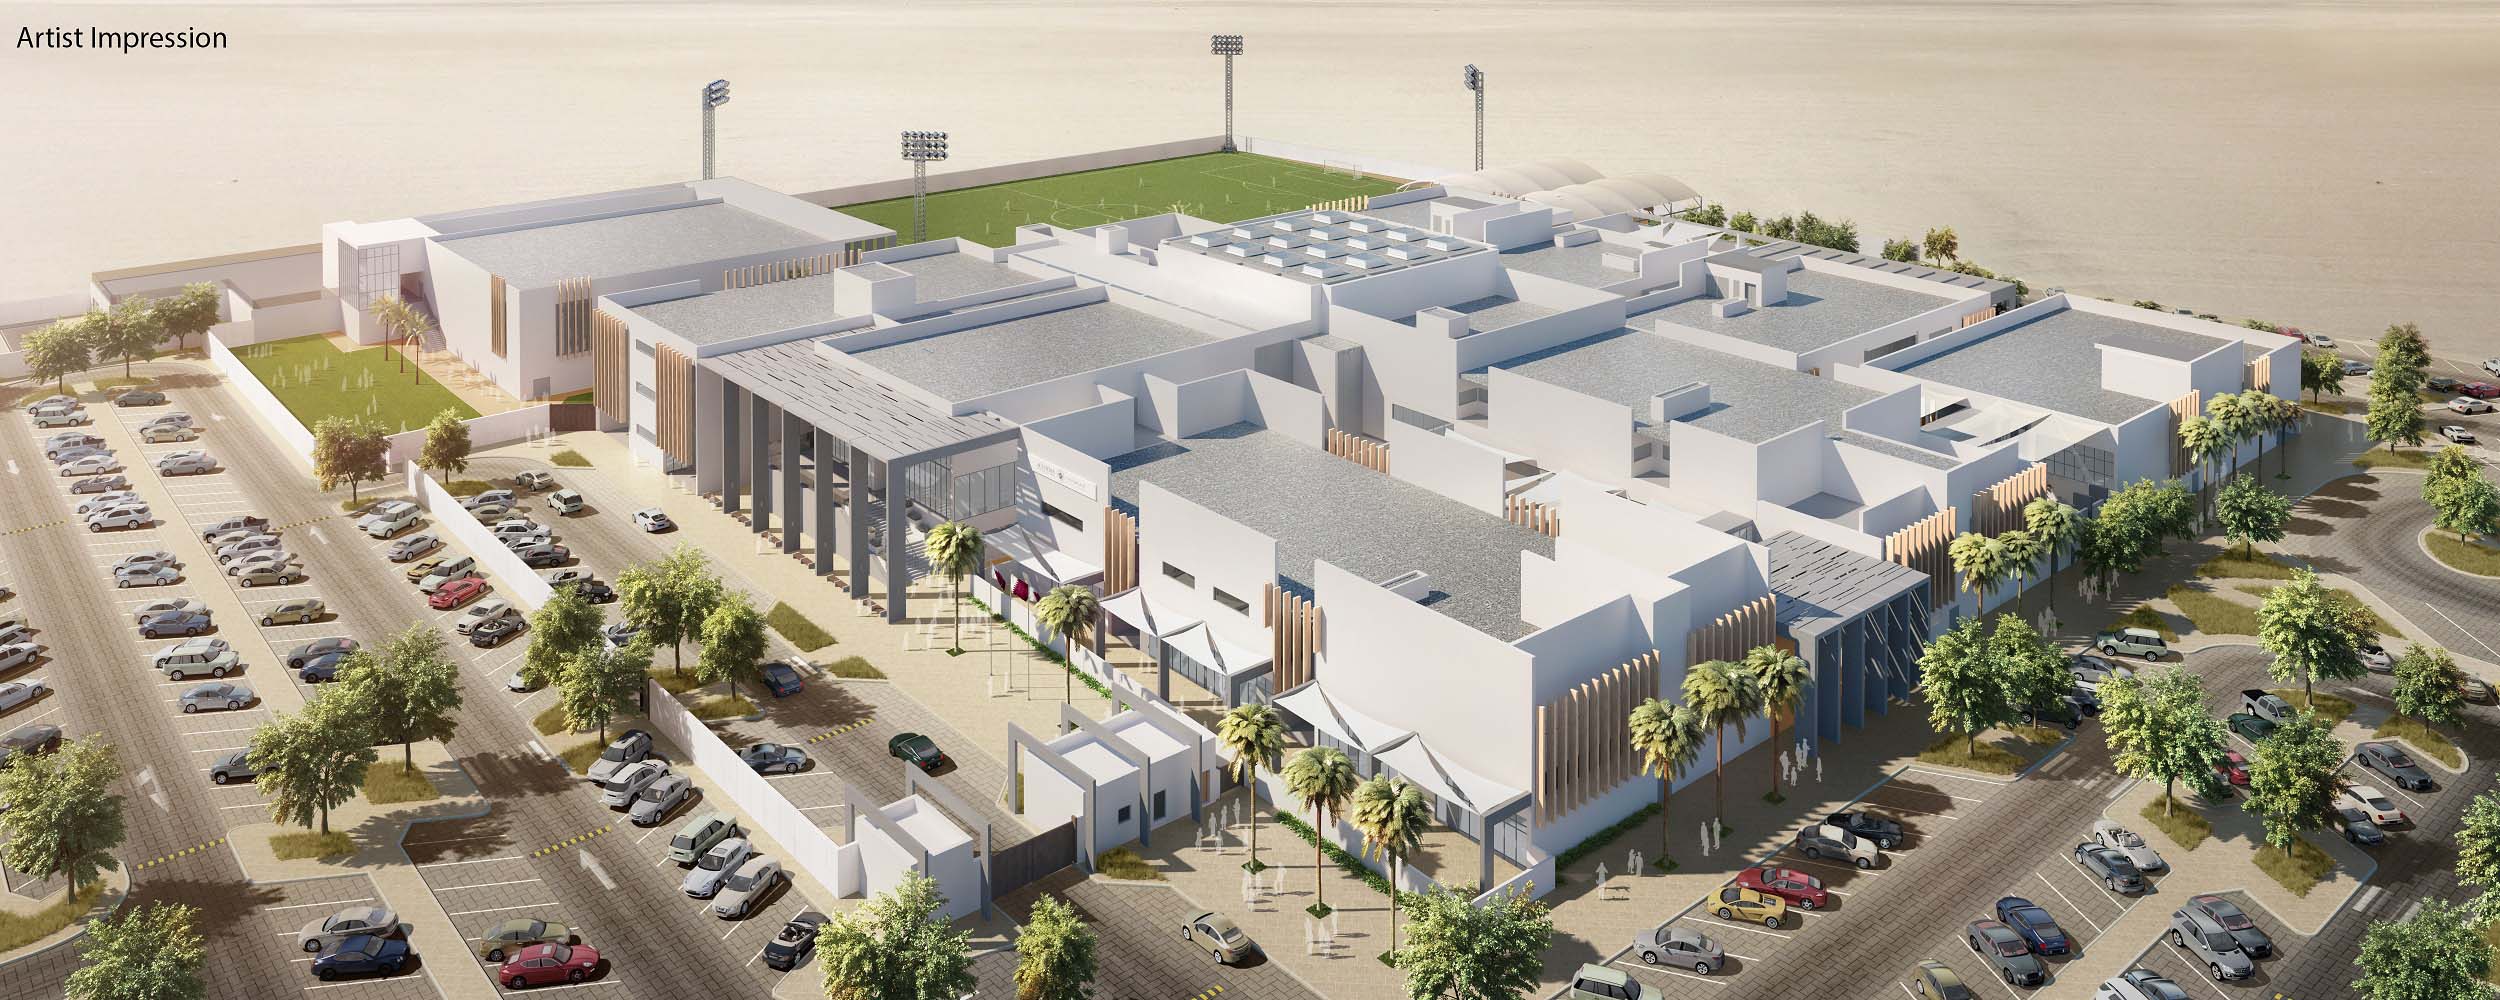 An artist's impression of the new ACS Doha campus